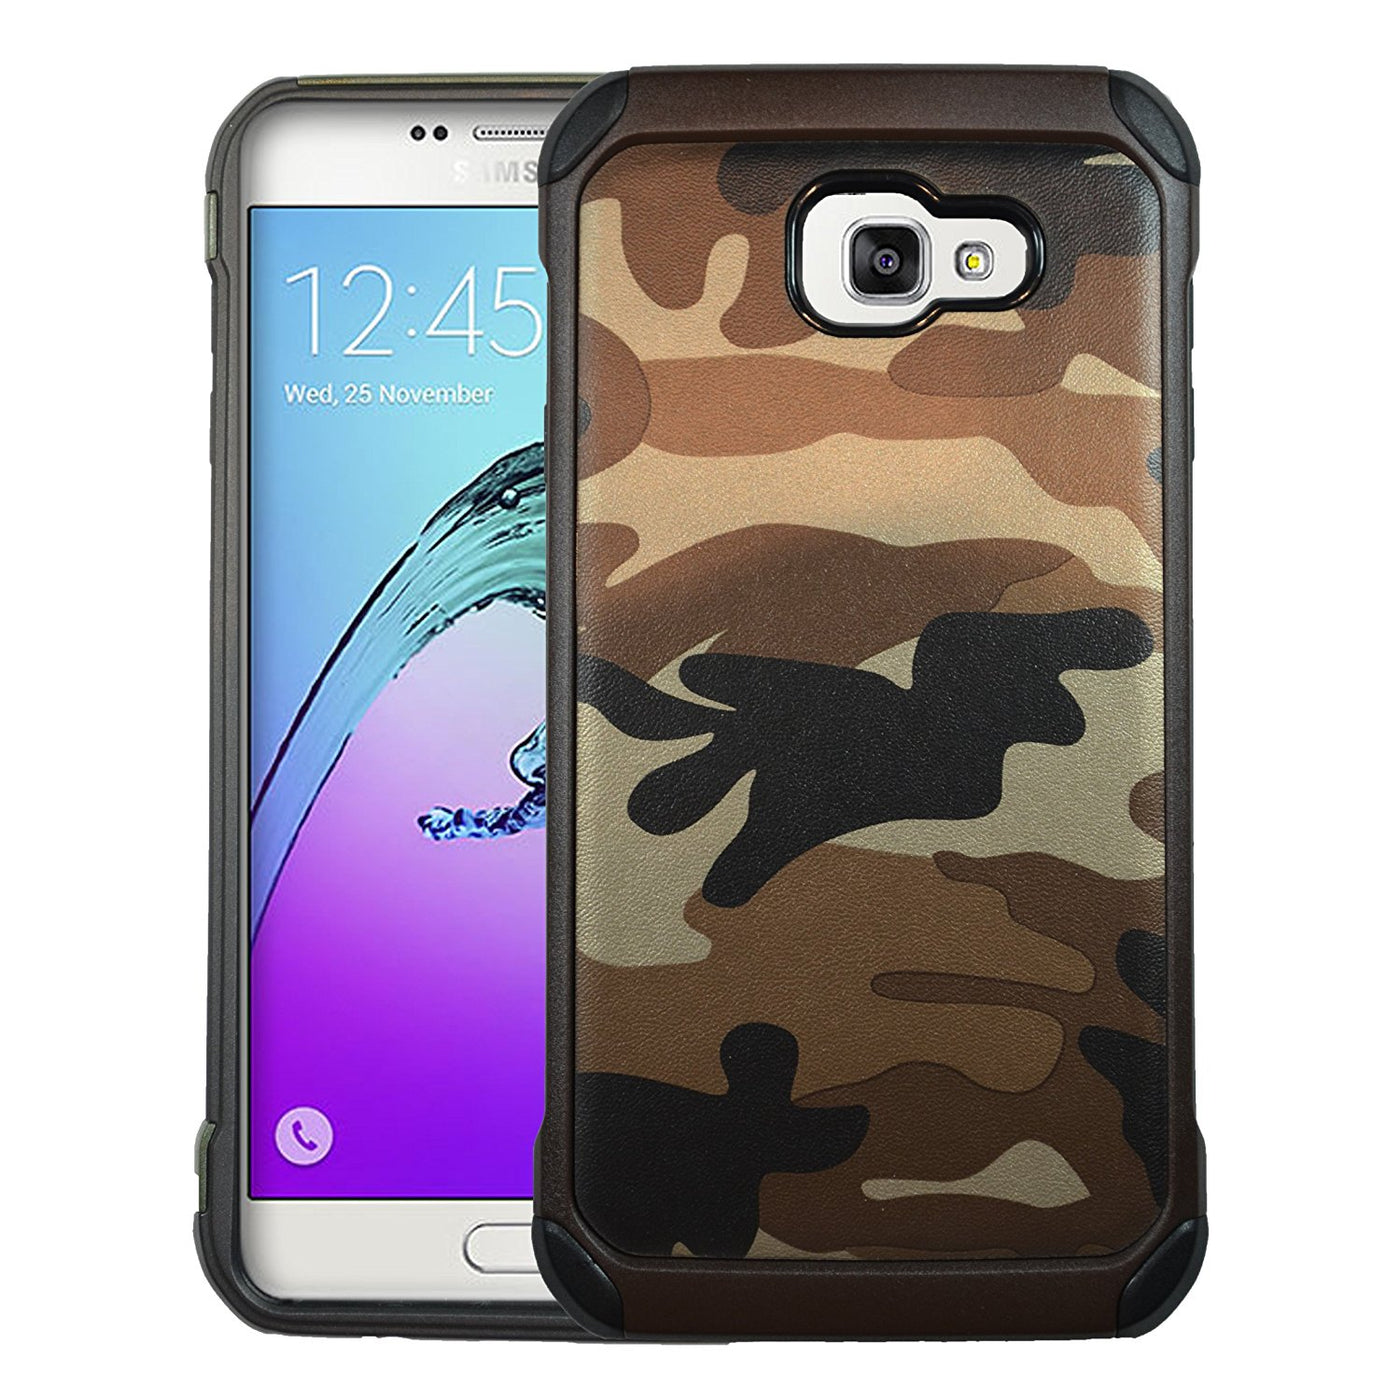 Samsung Galaxy A5 2017 back case cover with camera protection